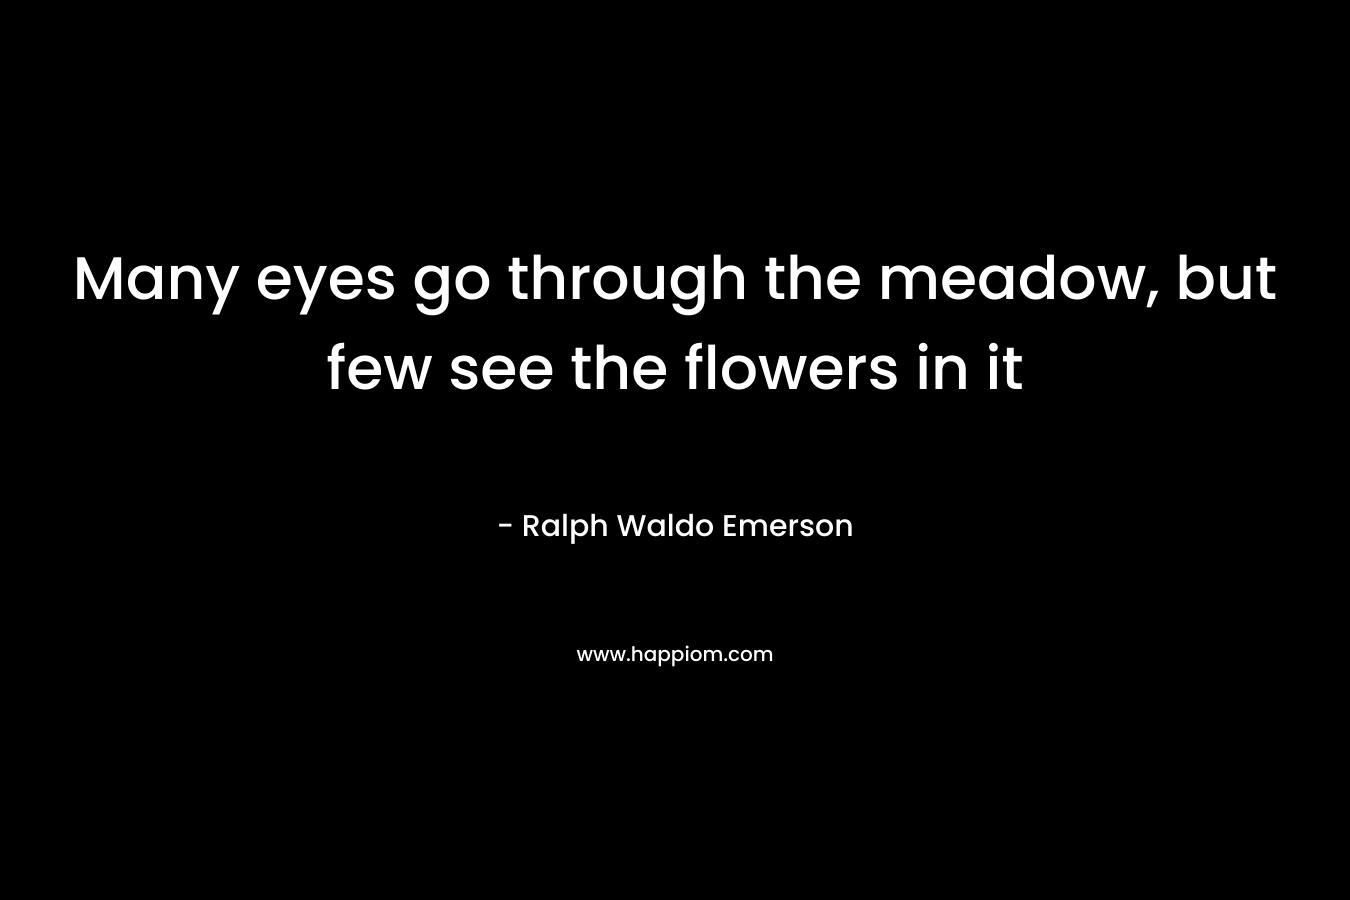 Many eyes go through the meadow, but few see the flowers in it – Ralph Waldo Emerson